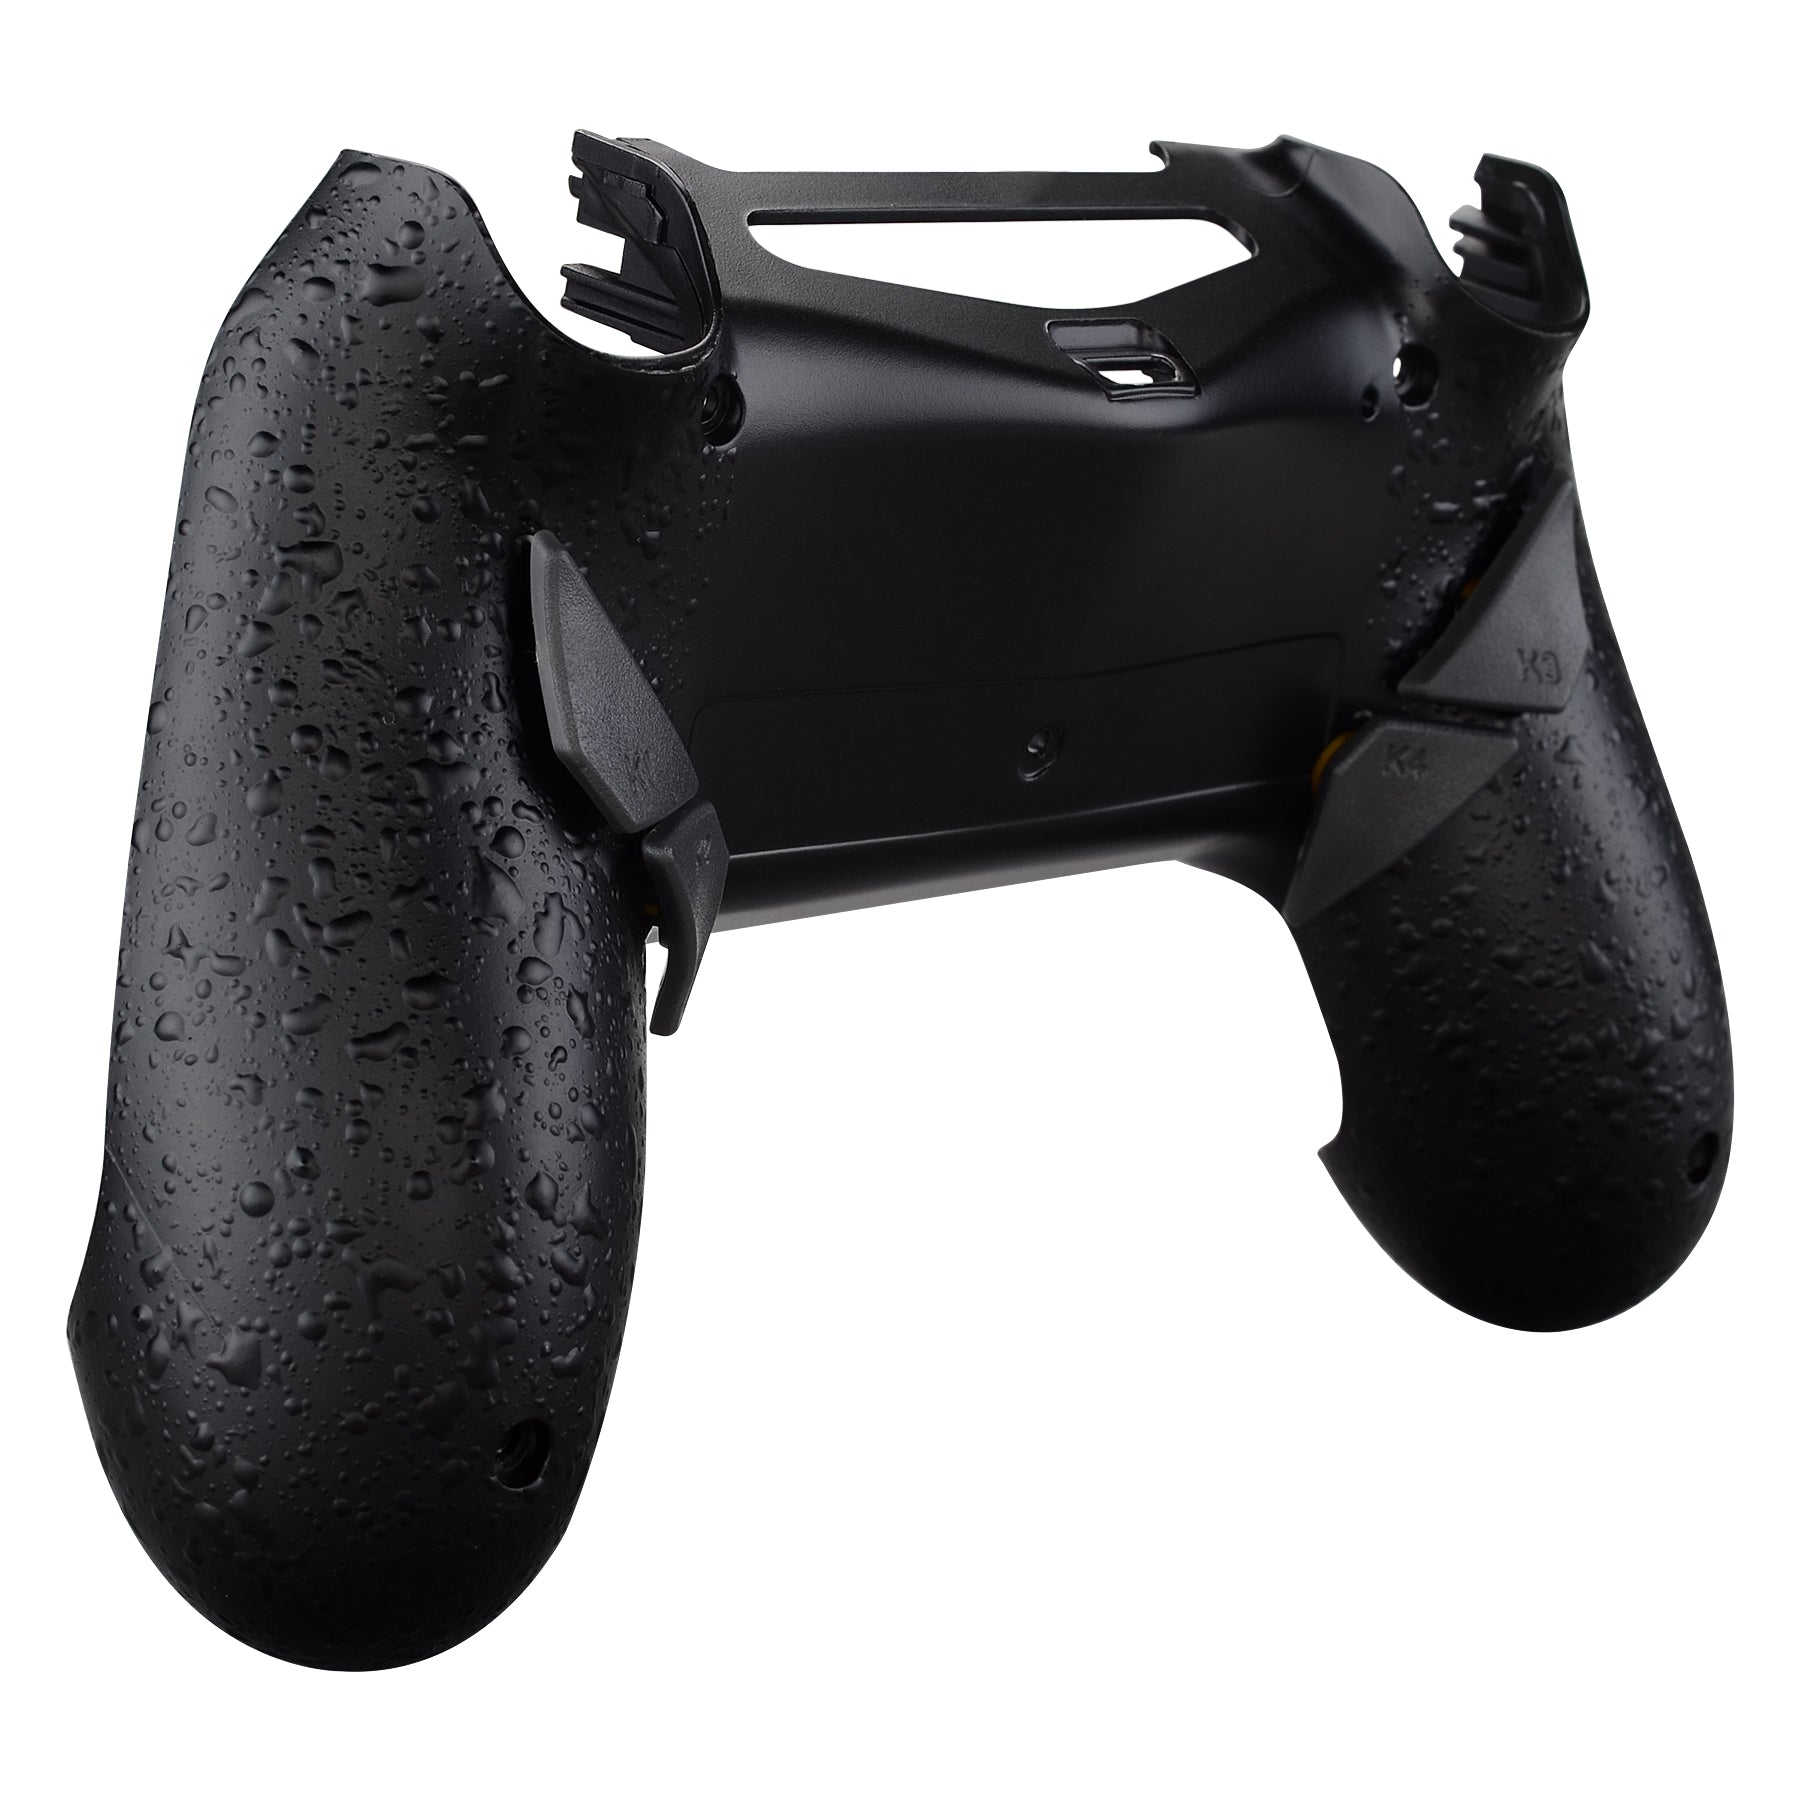 eXtremeRate Retail Textured Black Dawn Remappable Remap Kit with Redesigned Back Shell & 4 Back Buttons for ps4 Controller JDM 040/050/055 - P4RM006